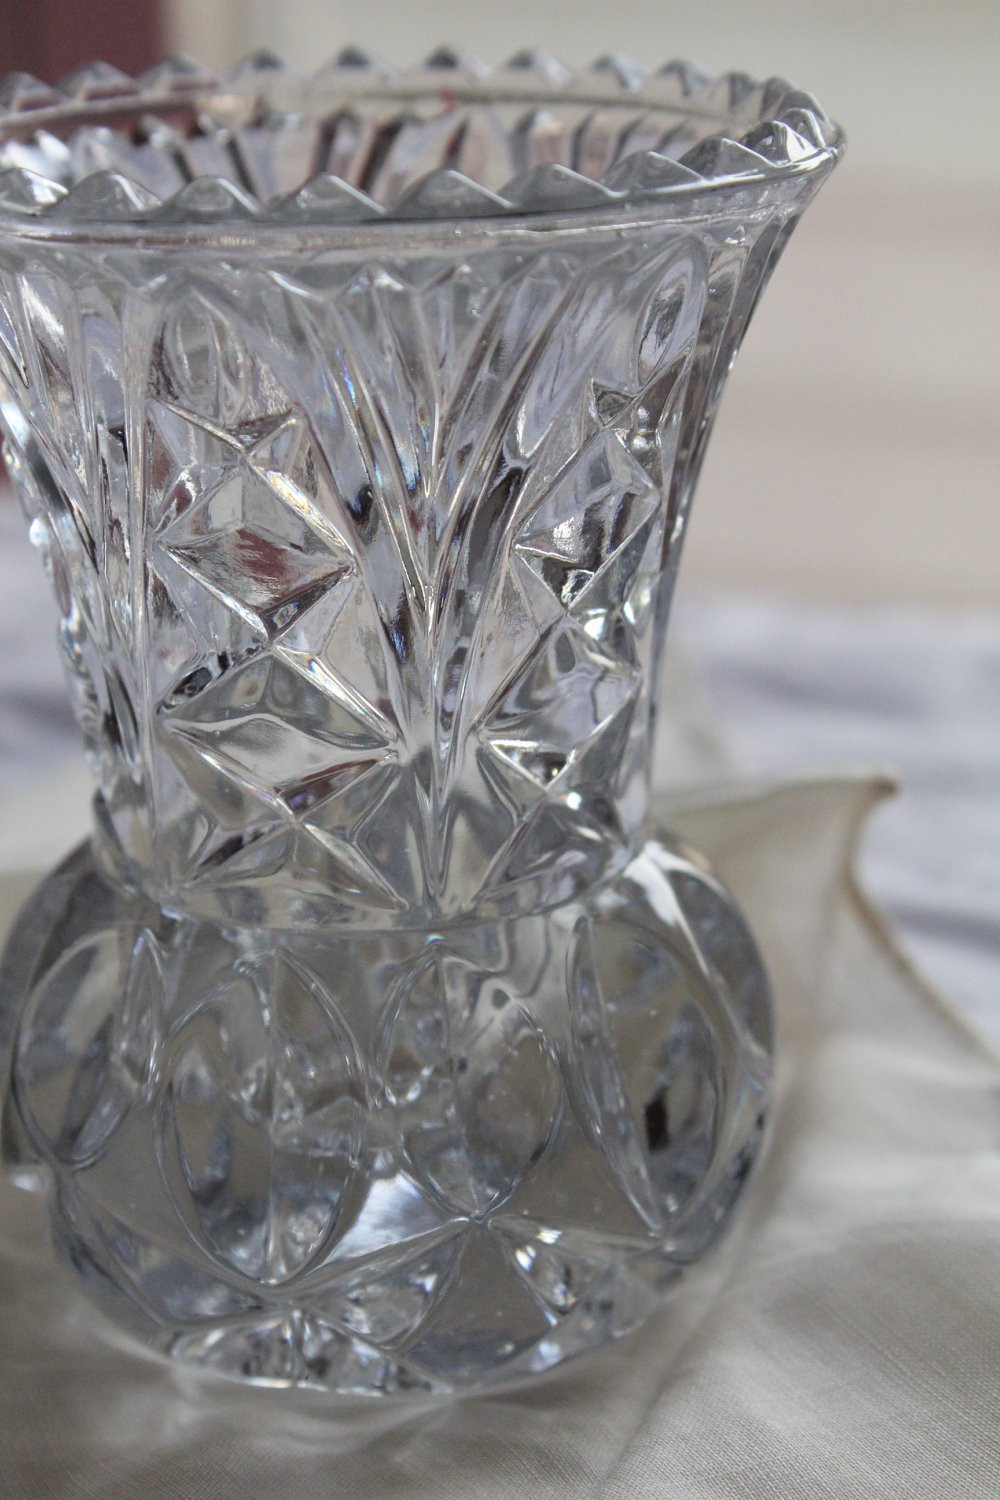 28 Spectacular Lead Crystal Cut Glass Vase 2024 free download lead crystal cut glass vase of princess house two mini lead crystal bud vases toothpick for dc29fc294c28ezoom